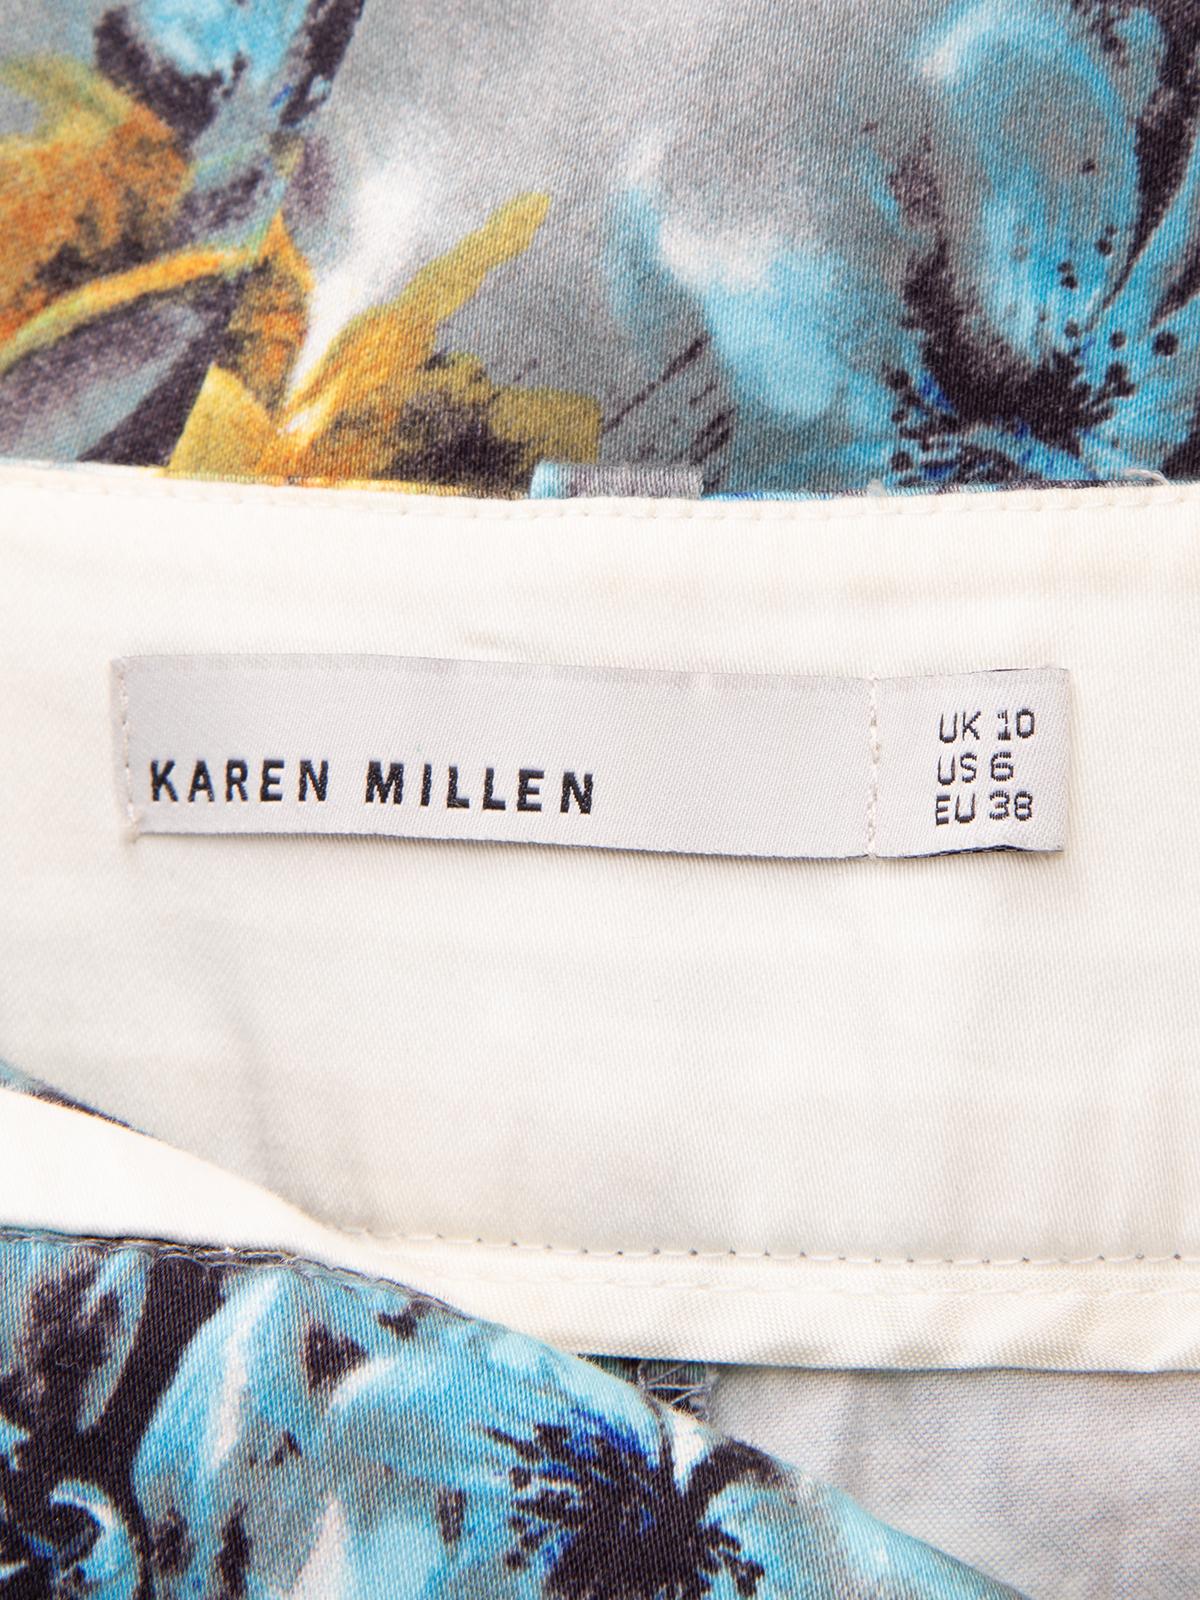 Karen Millen Women's Floral Trousers with Ankle Zip For Sale 2